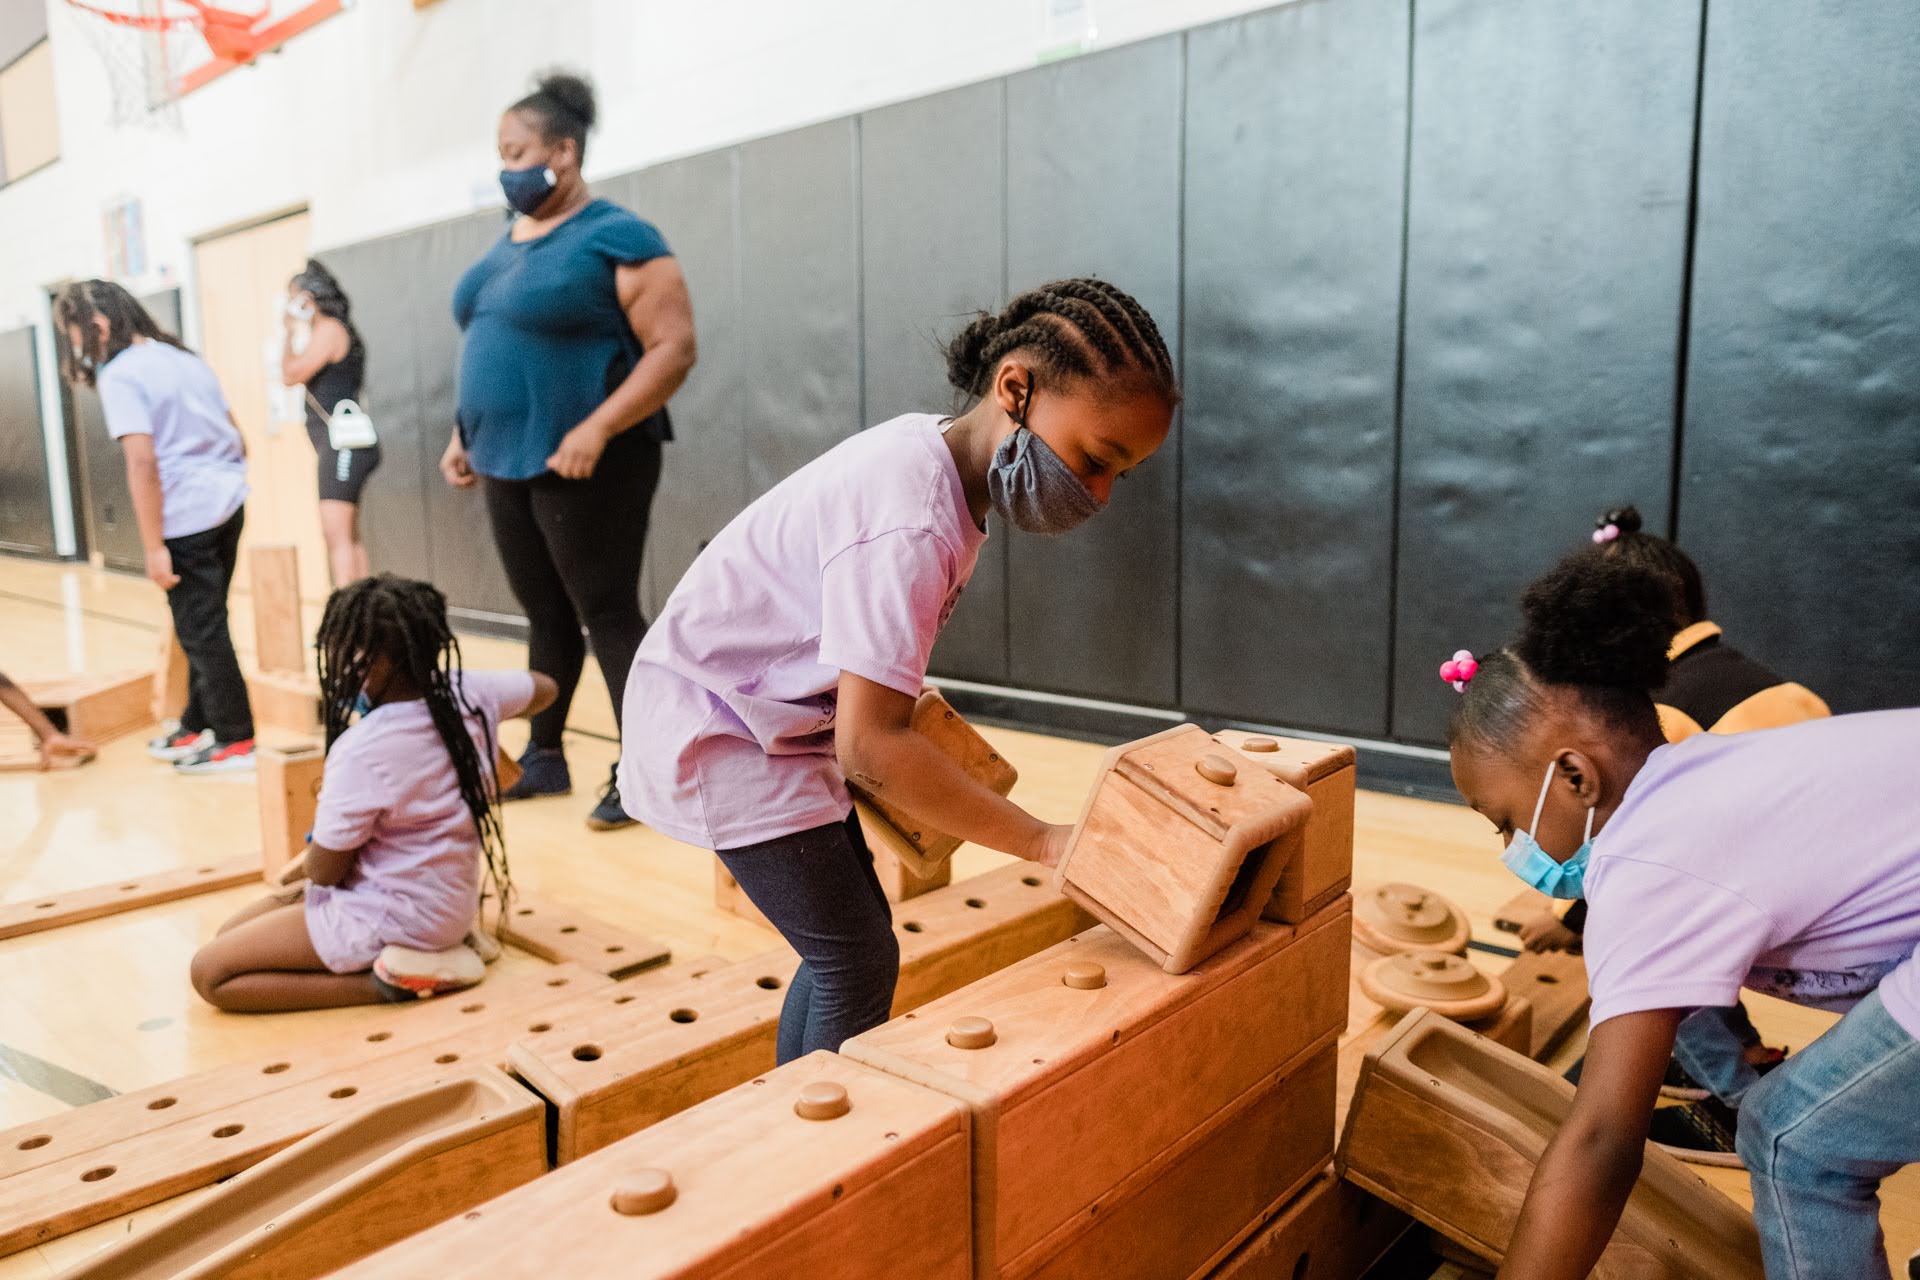 Students play with building blocks in the gym at PPS Faison